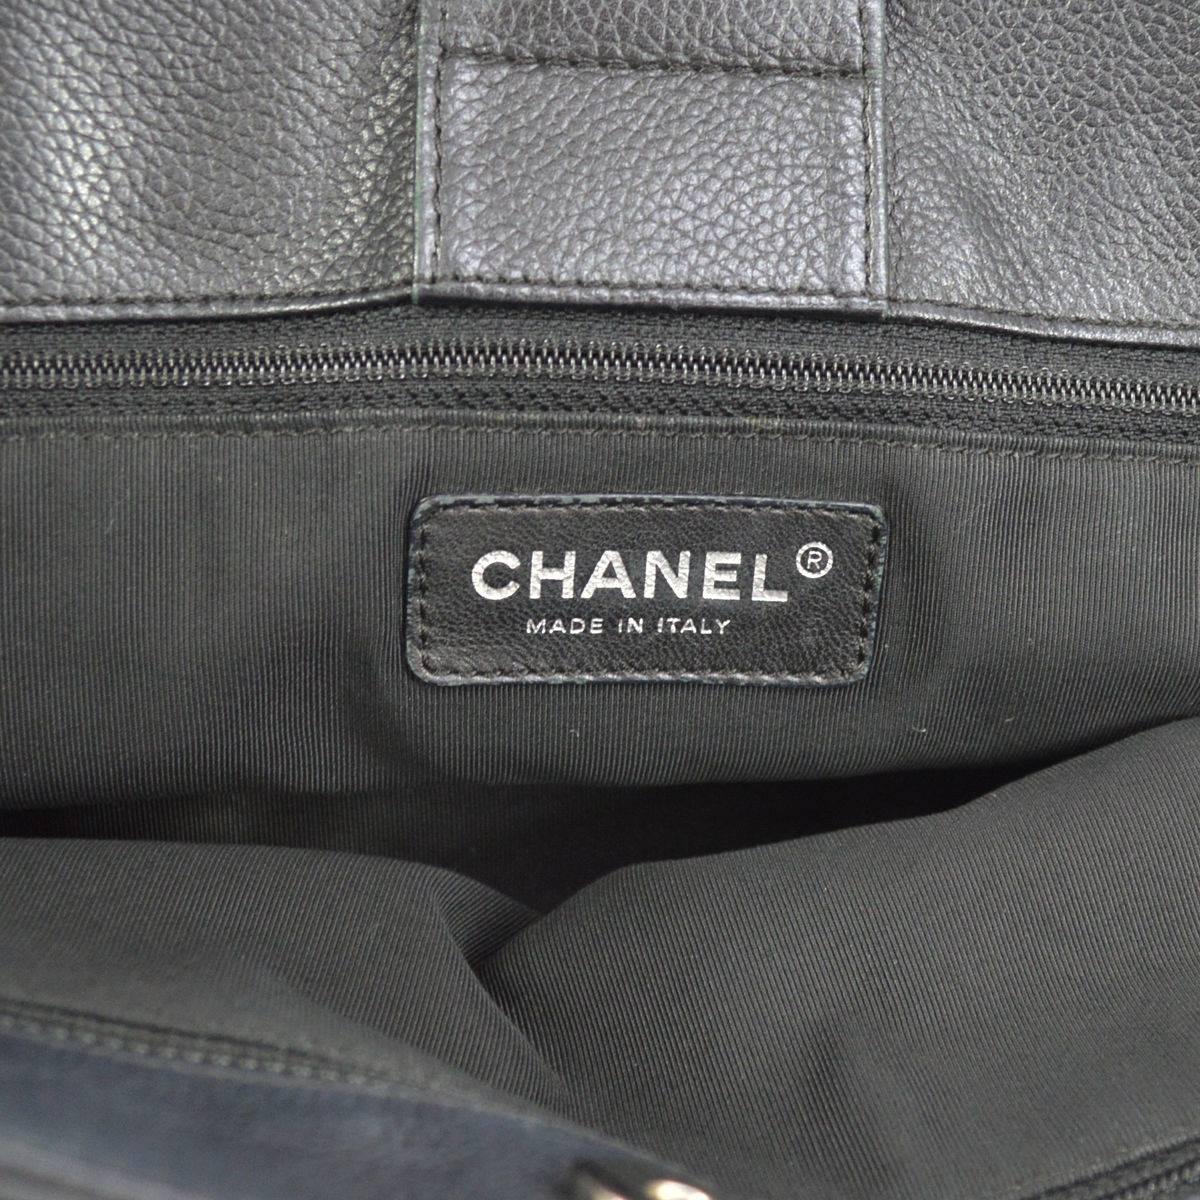 Chanel Black Leather Top Handle Carryall Travel Tote Bag 4